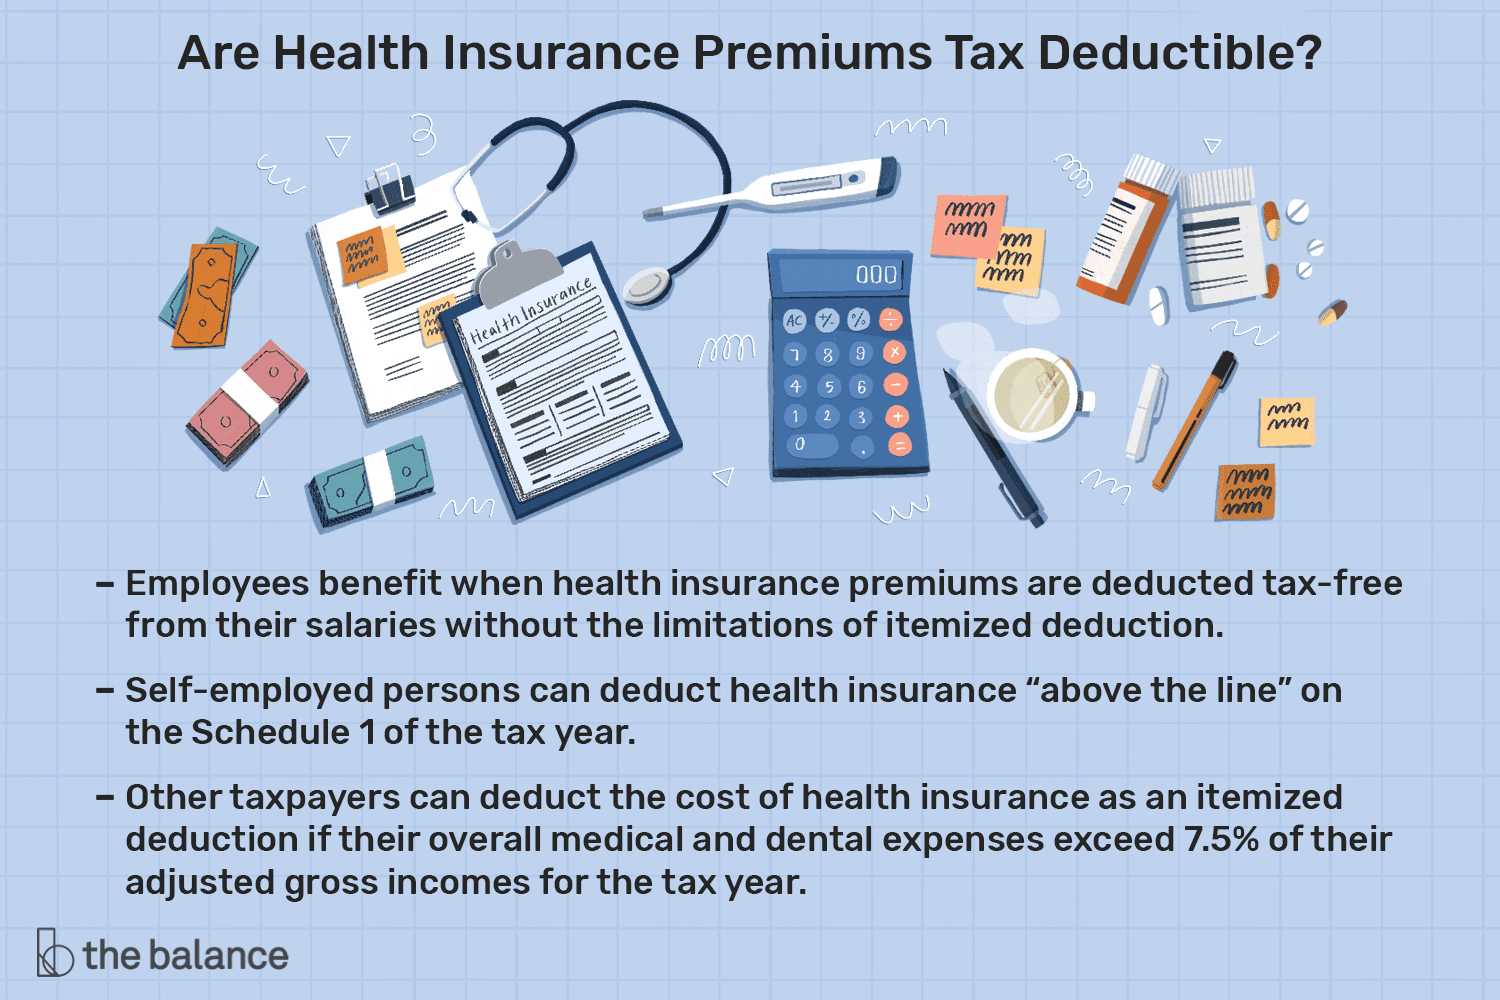 are health insurance premiums tax deductible for retirees?